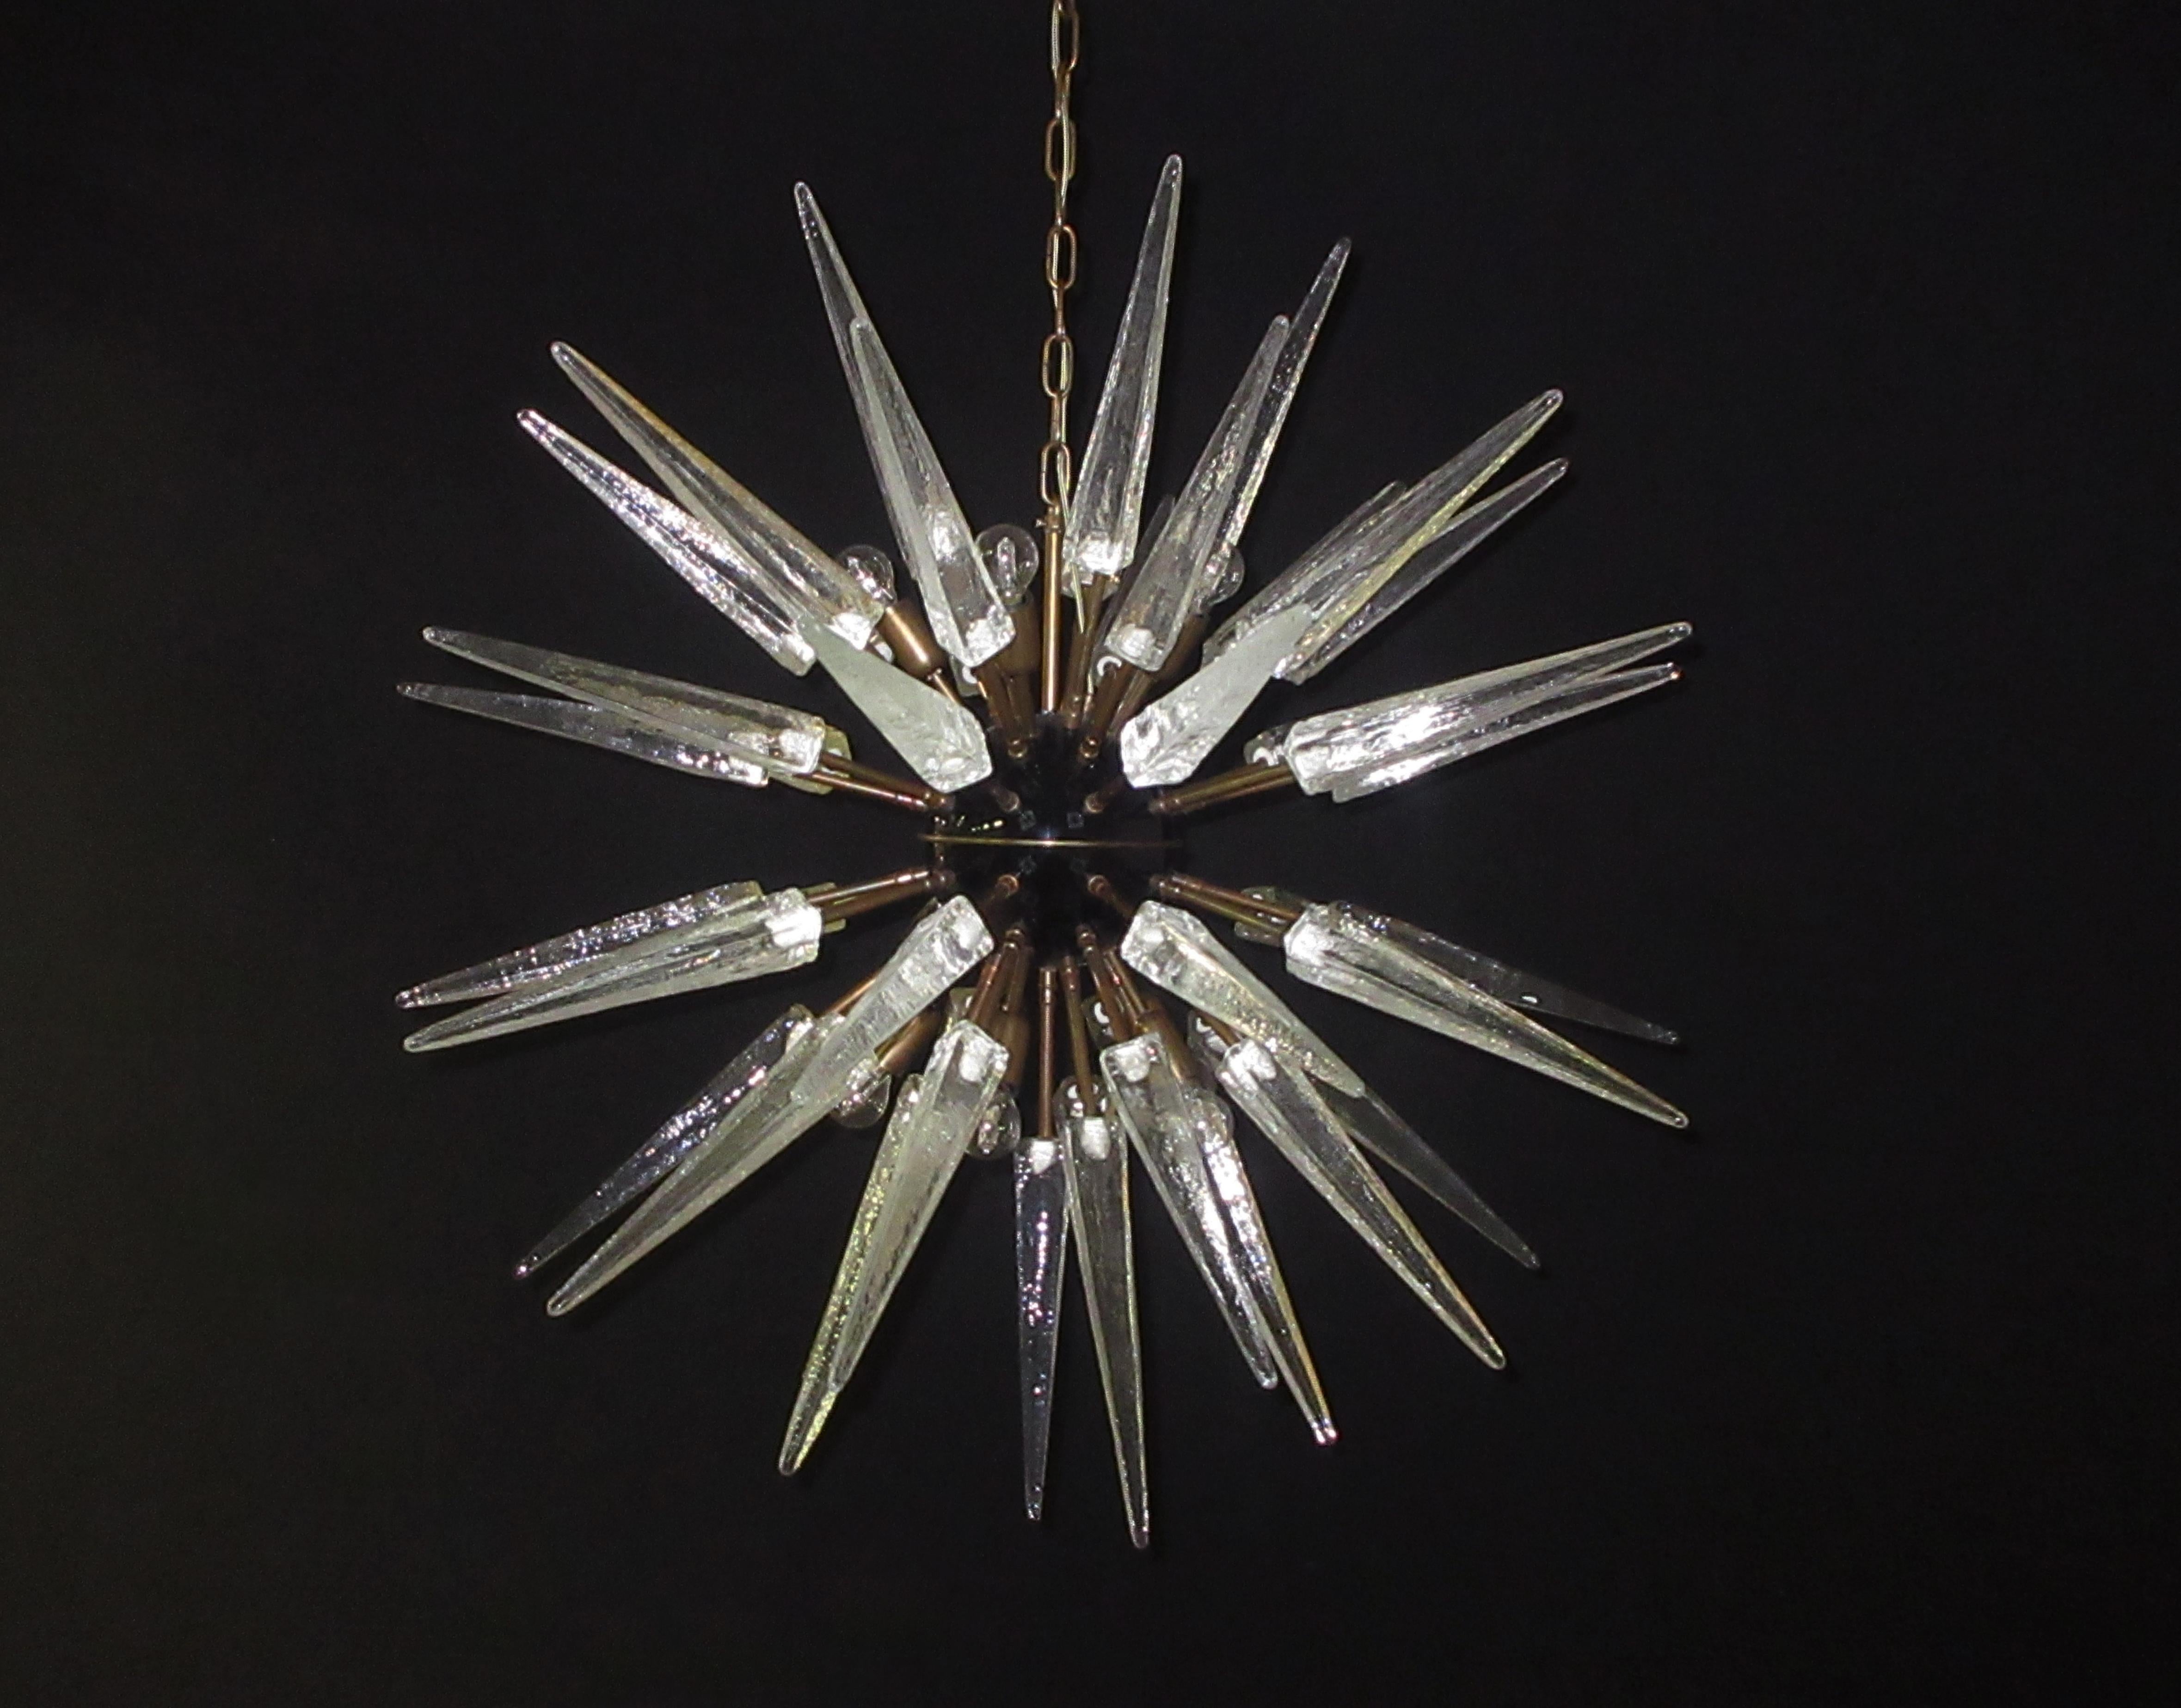 Italian Sputnik chandelier in a black and brass metal, 51 unobtainable trasparent glass tips. Murano blown glass in a traditional way. 10 light points.
Period: late xx century
Dimensions: 55,10 inches (140 cm) height with chain; 37,40 inches (95